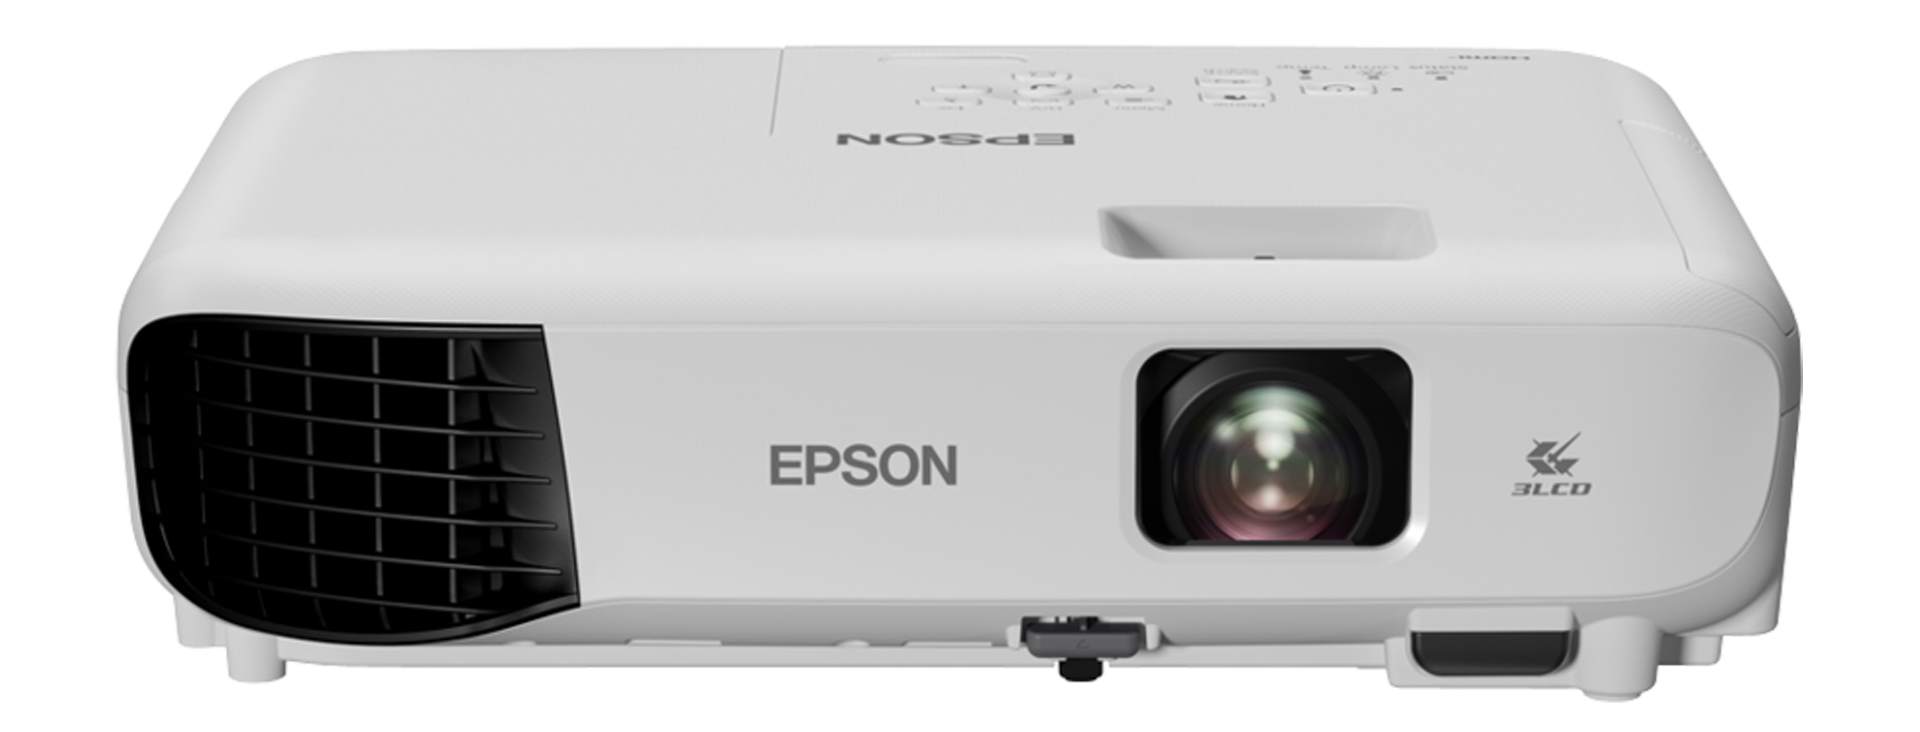 EPSON Projector 1785w